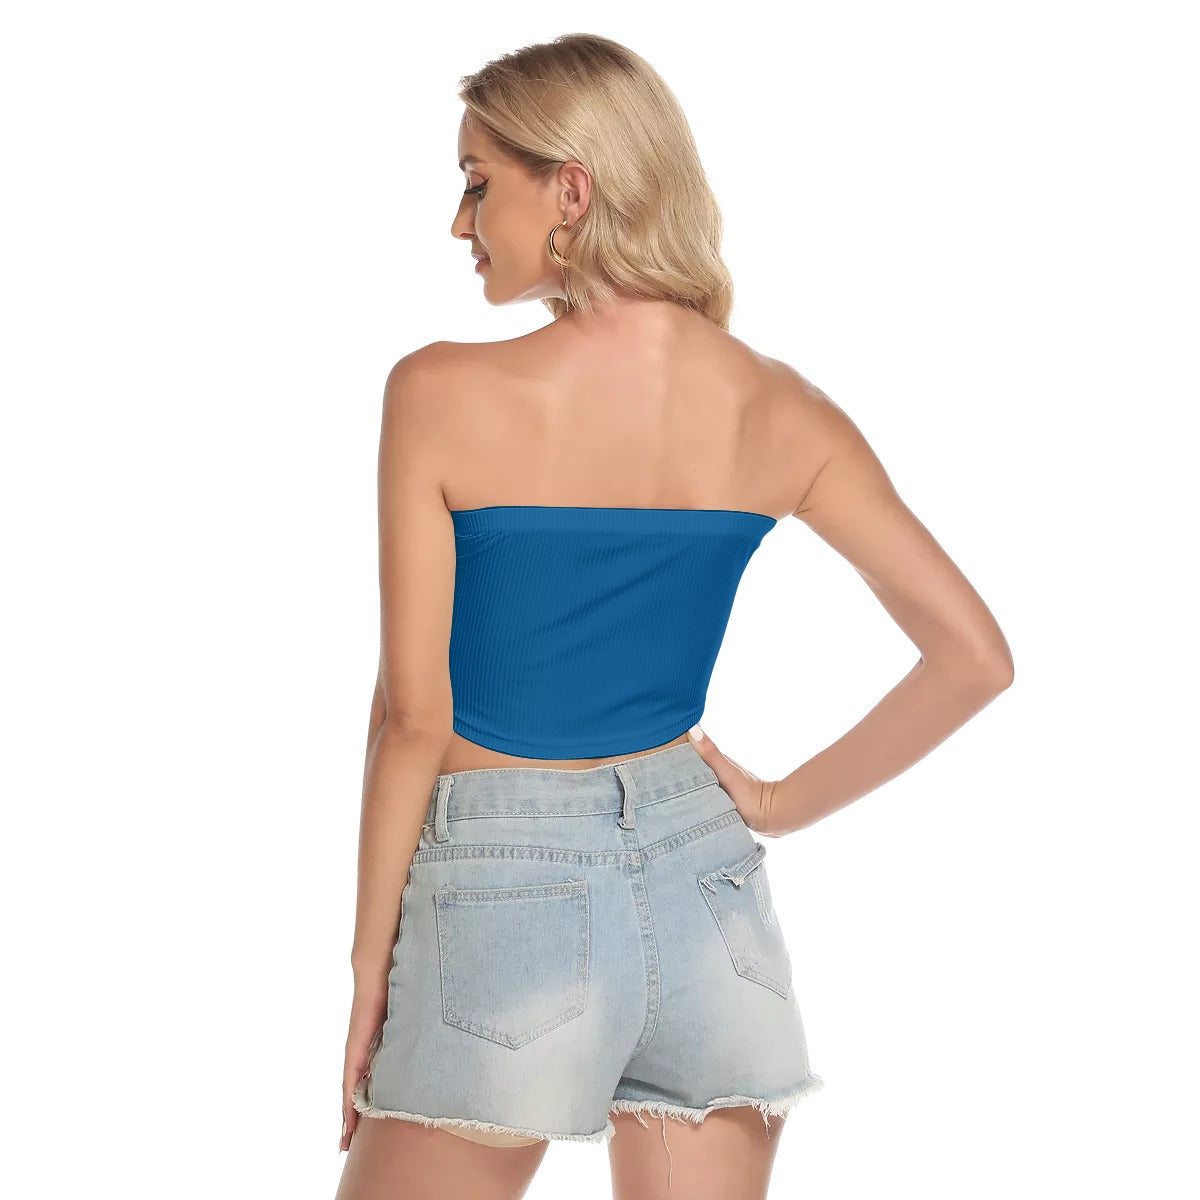 THE LOGO TUBE TOP IN ROYAL BLUE - Panic 39